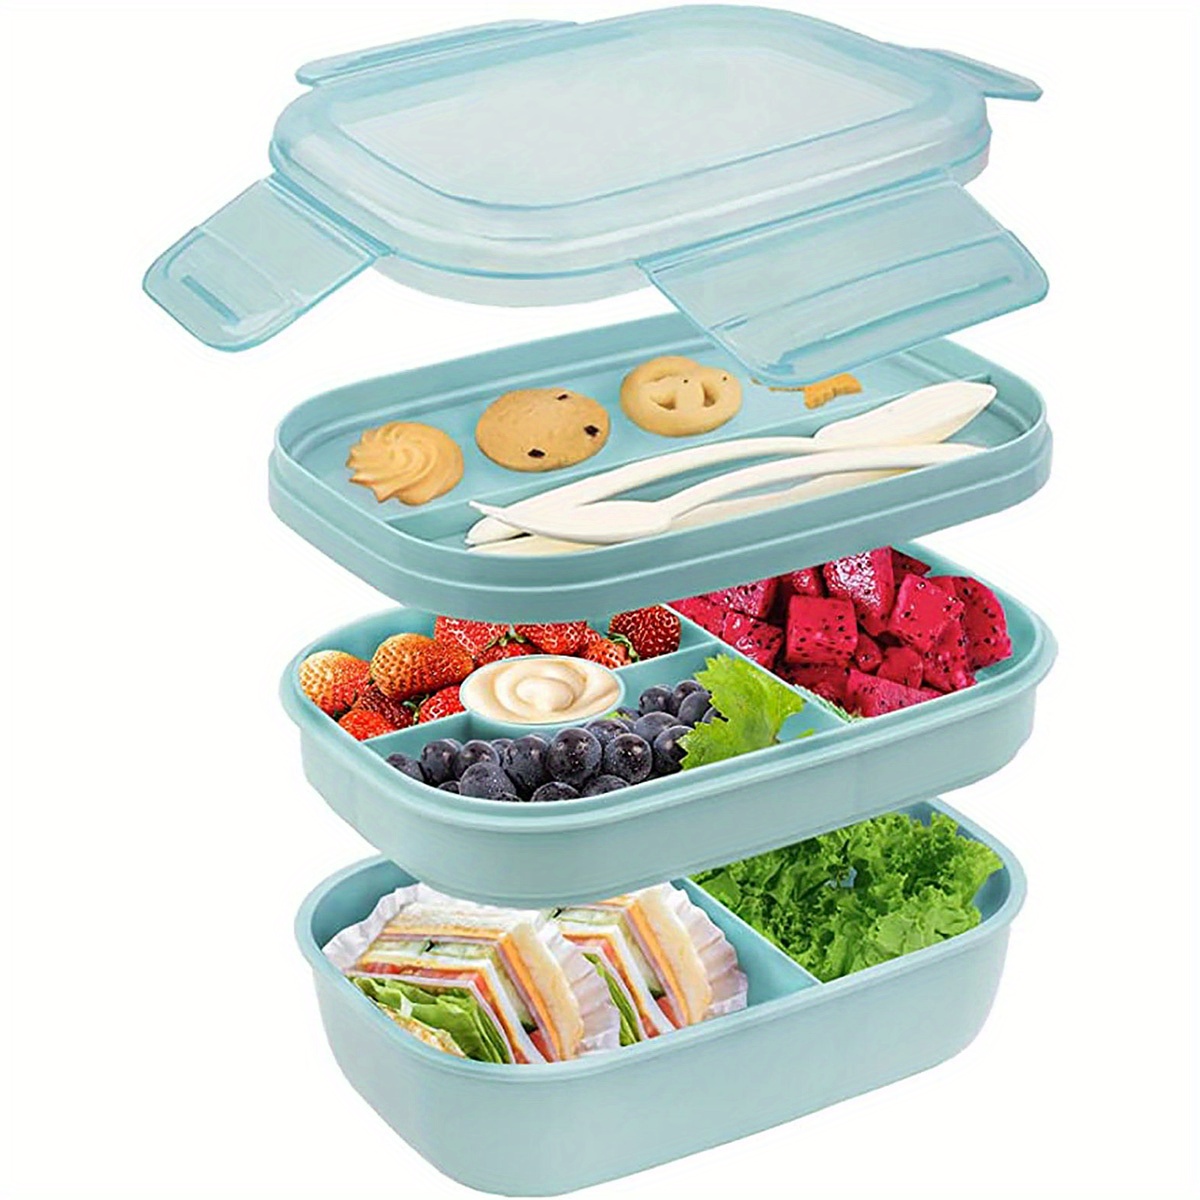 2-Compartment Bento Box for Kids Plastic Lunch Box Containers with